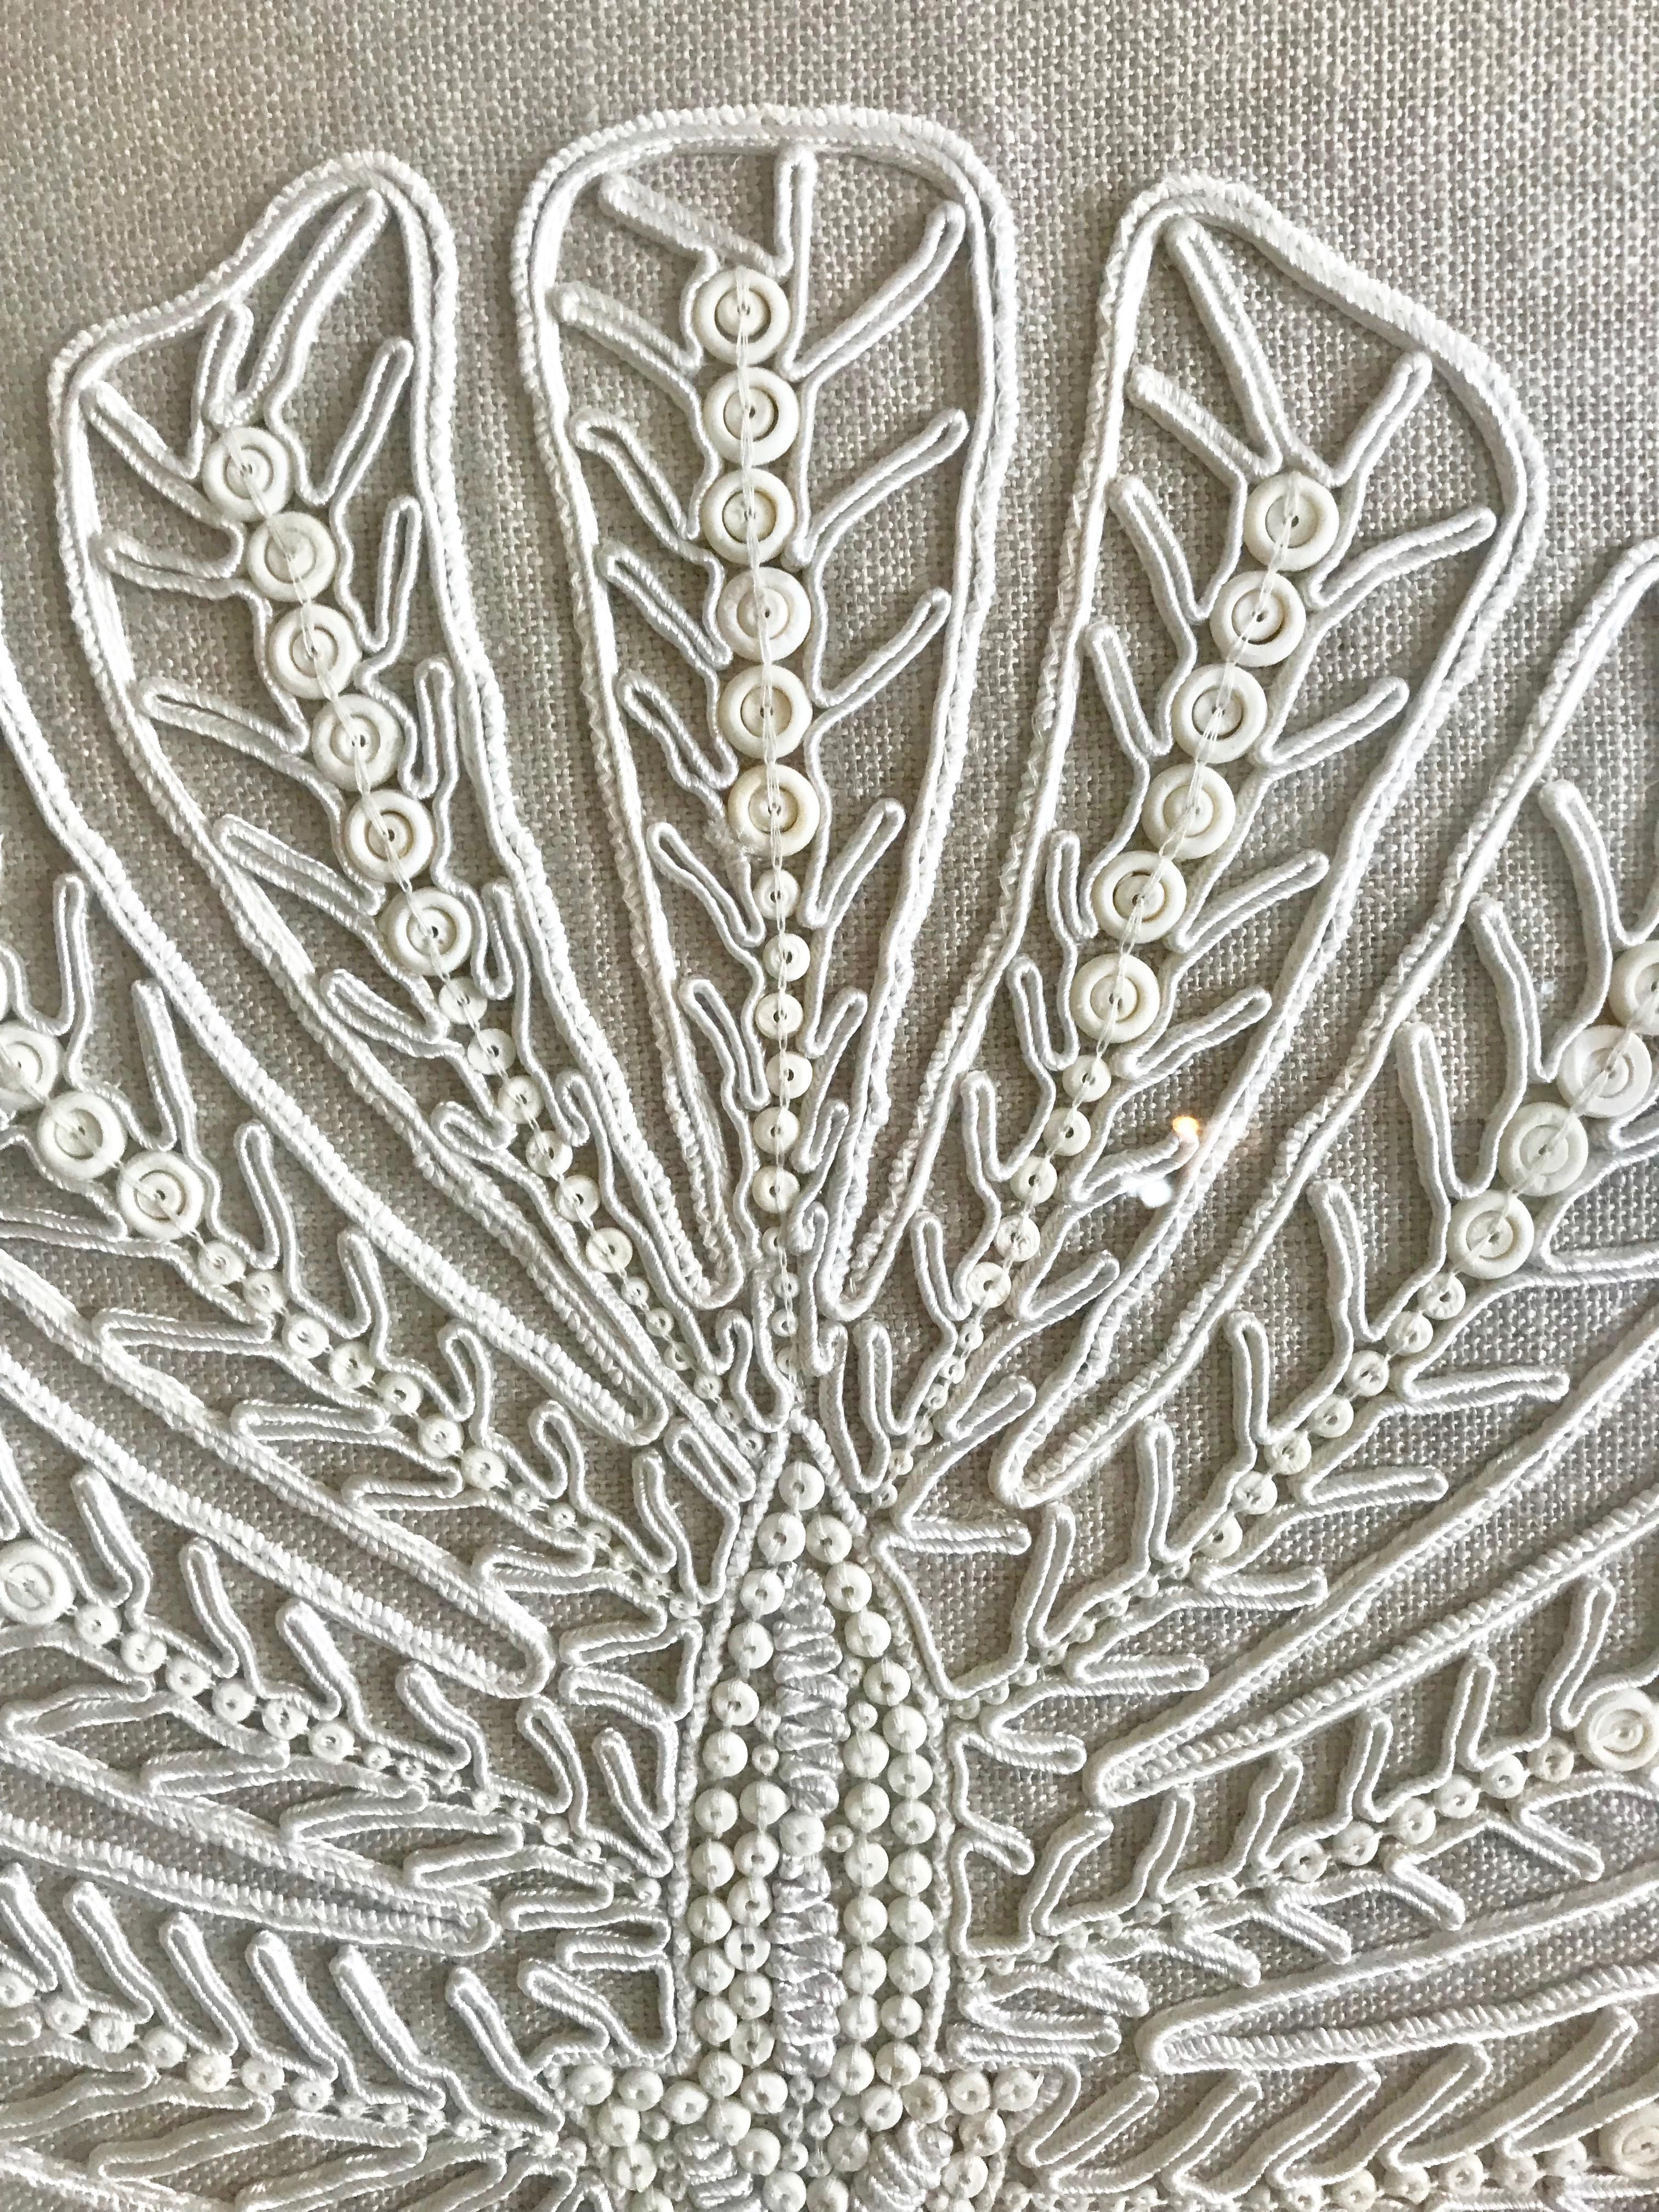 American Large Neutral Abstract White Embroidery on Taupe Muslin